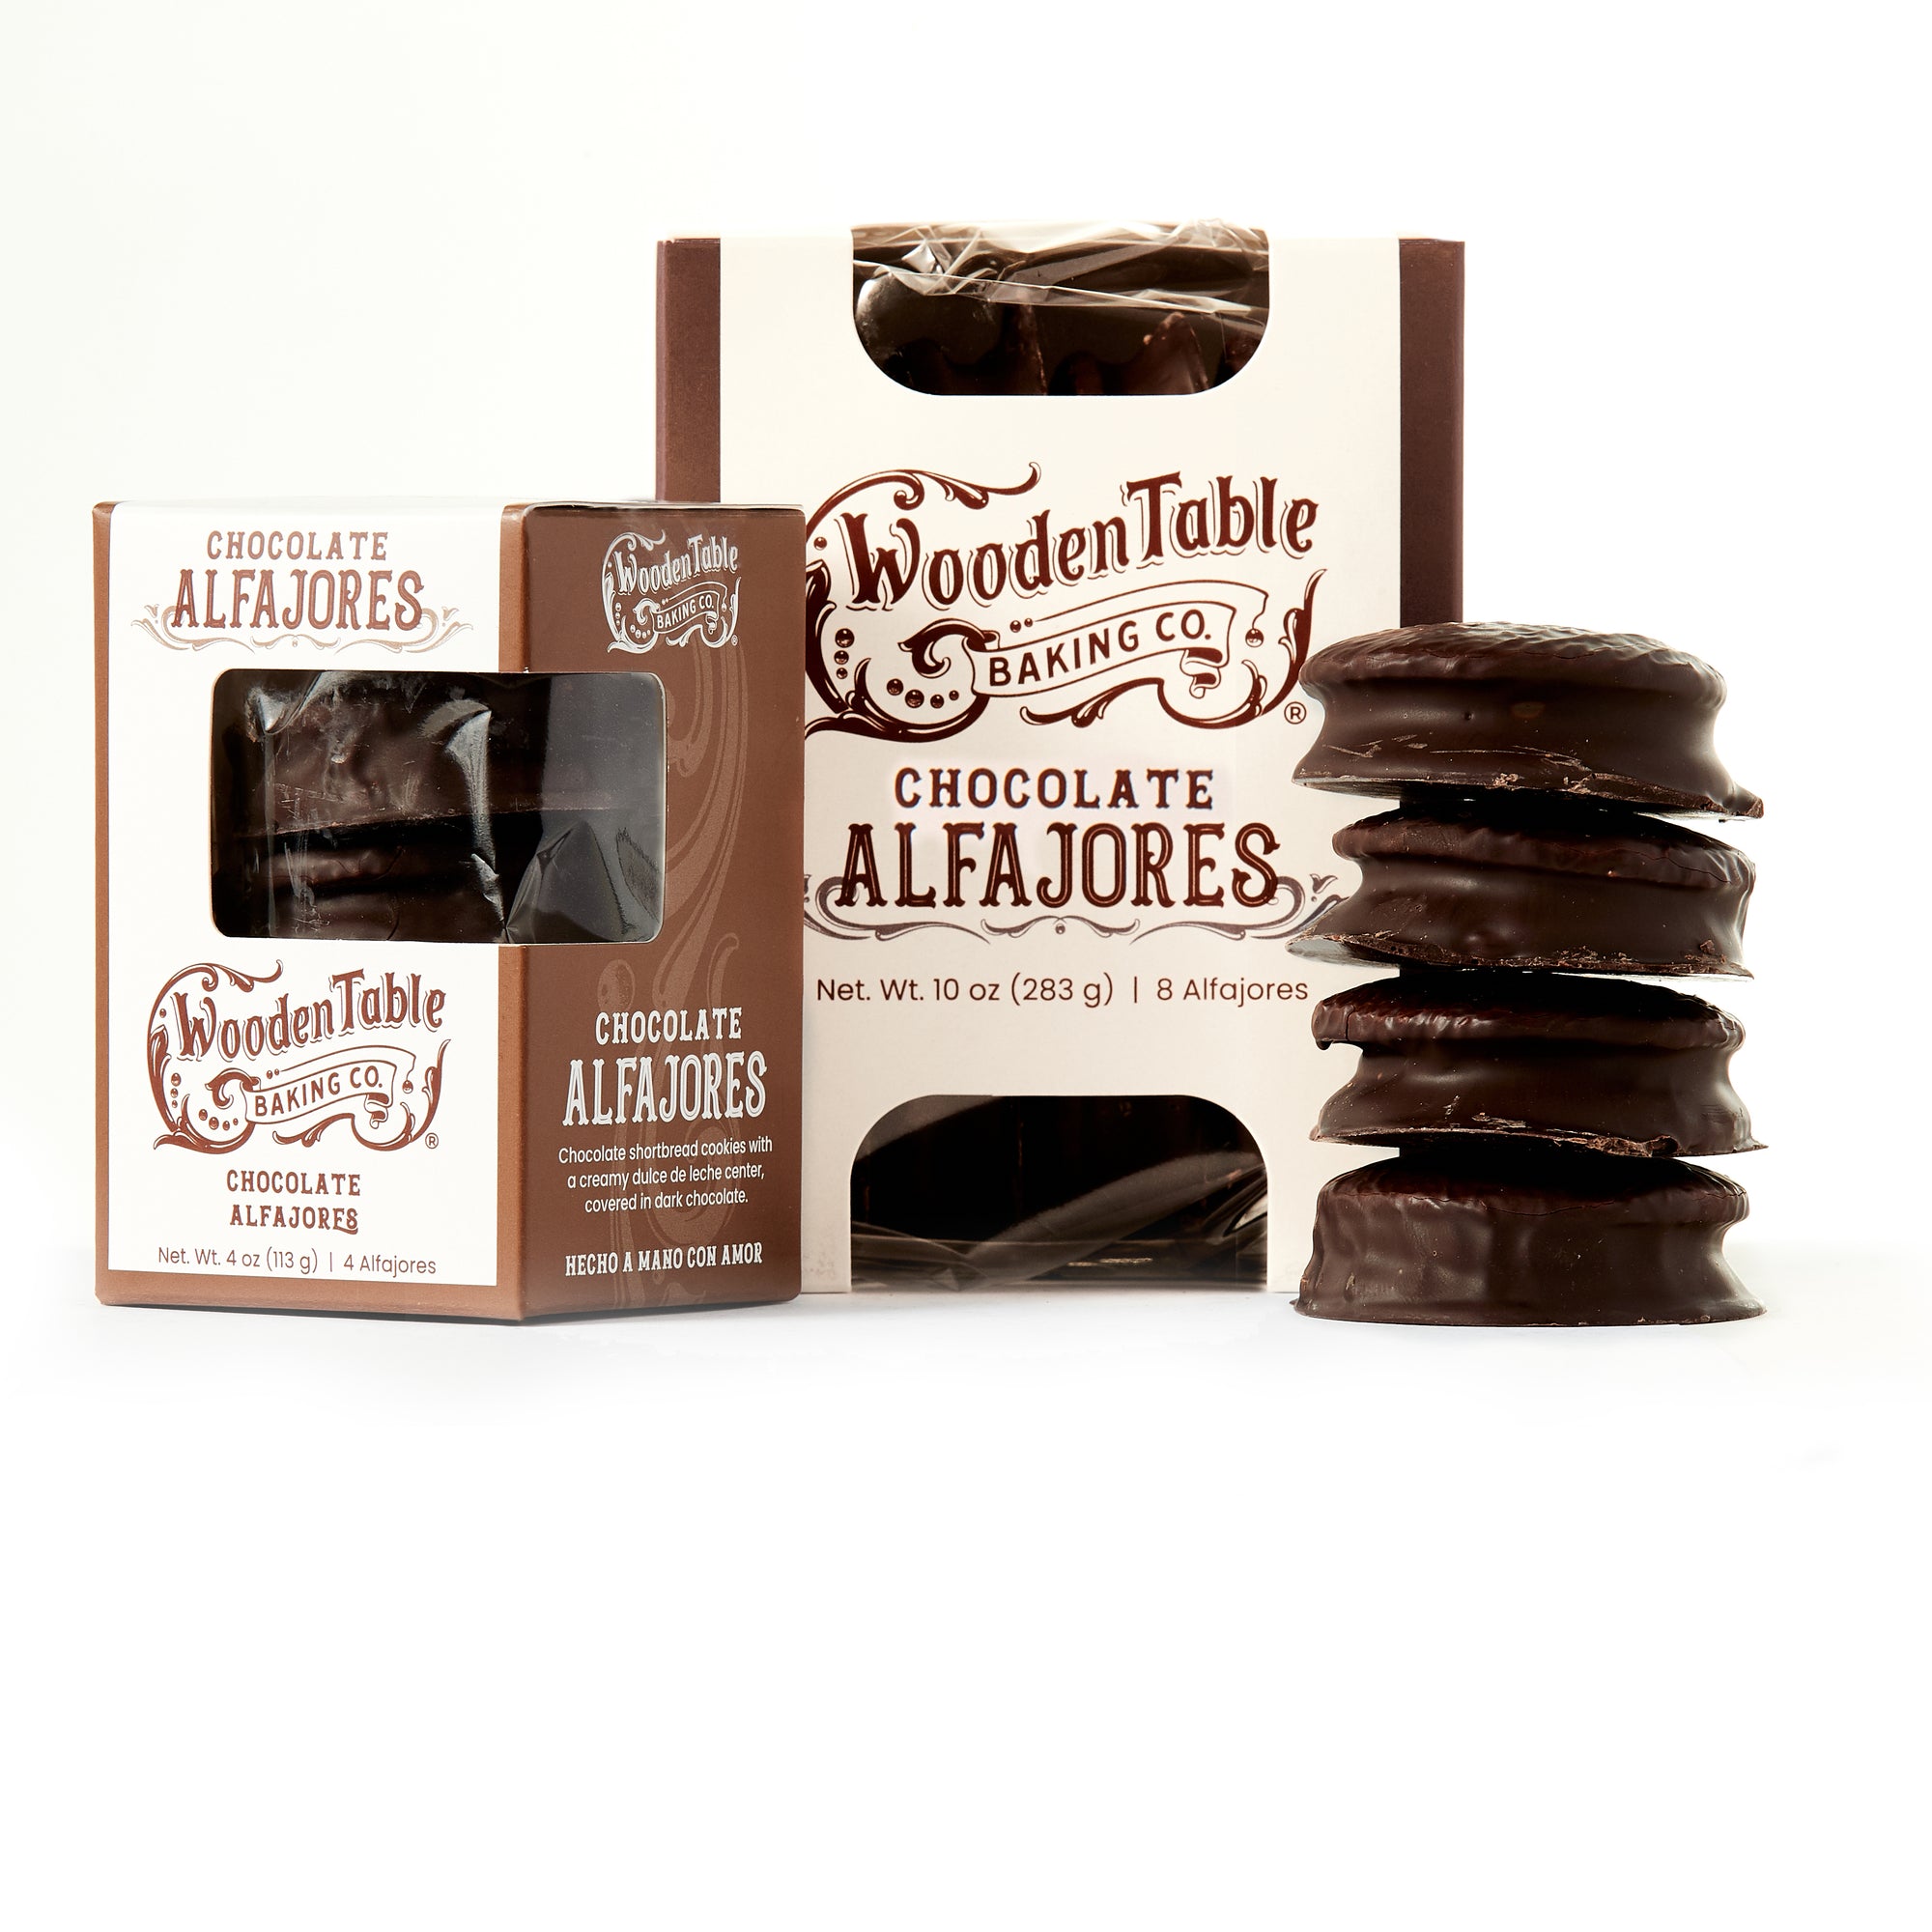  4 Dark Chocolate Alfajores in Packaging from Wooden Table Baking Company